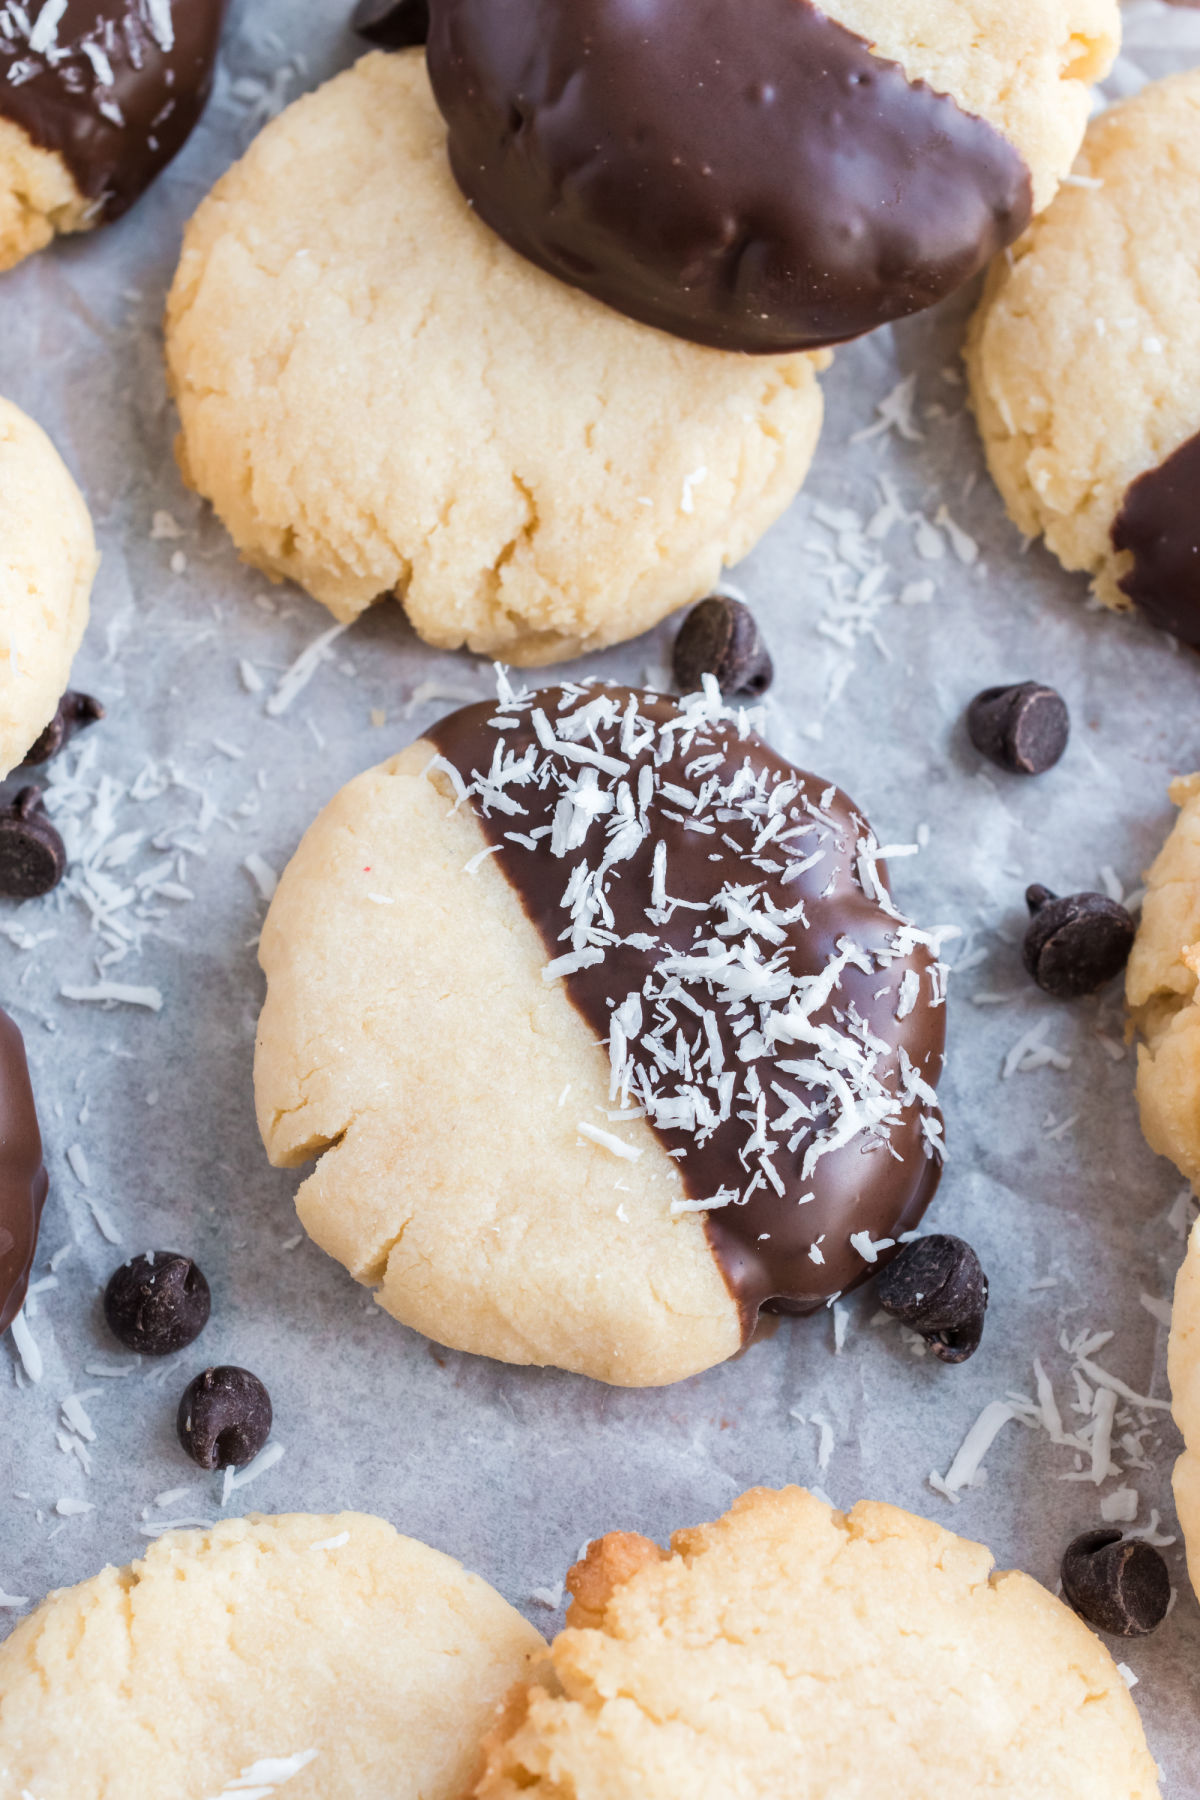 Coconut cookies dipped in a melted chocolate and flaked coconut.